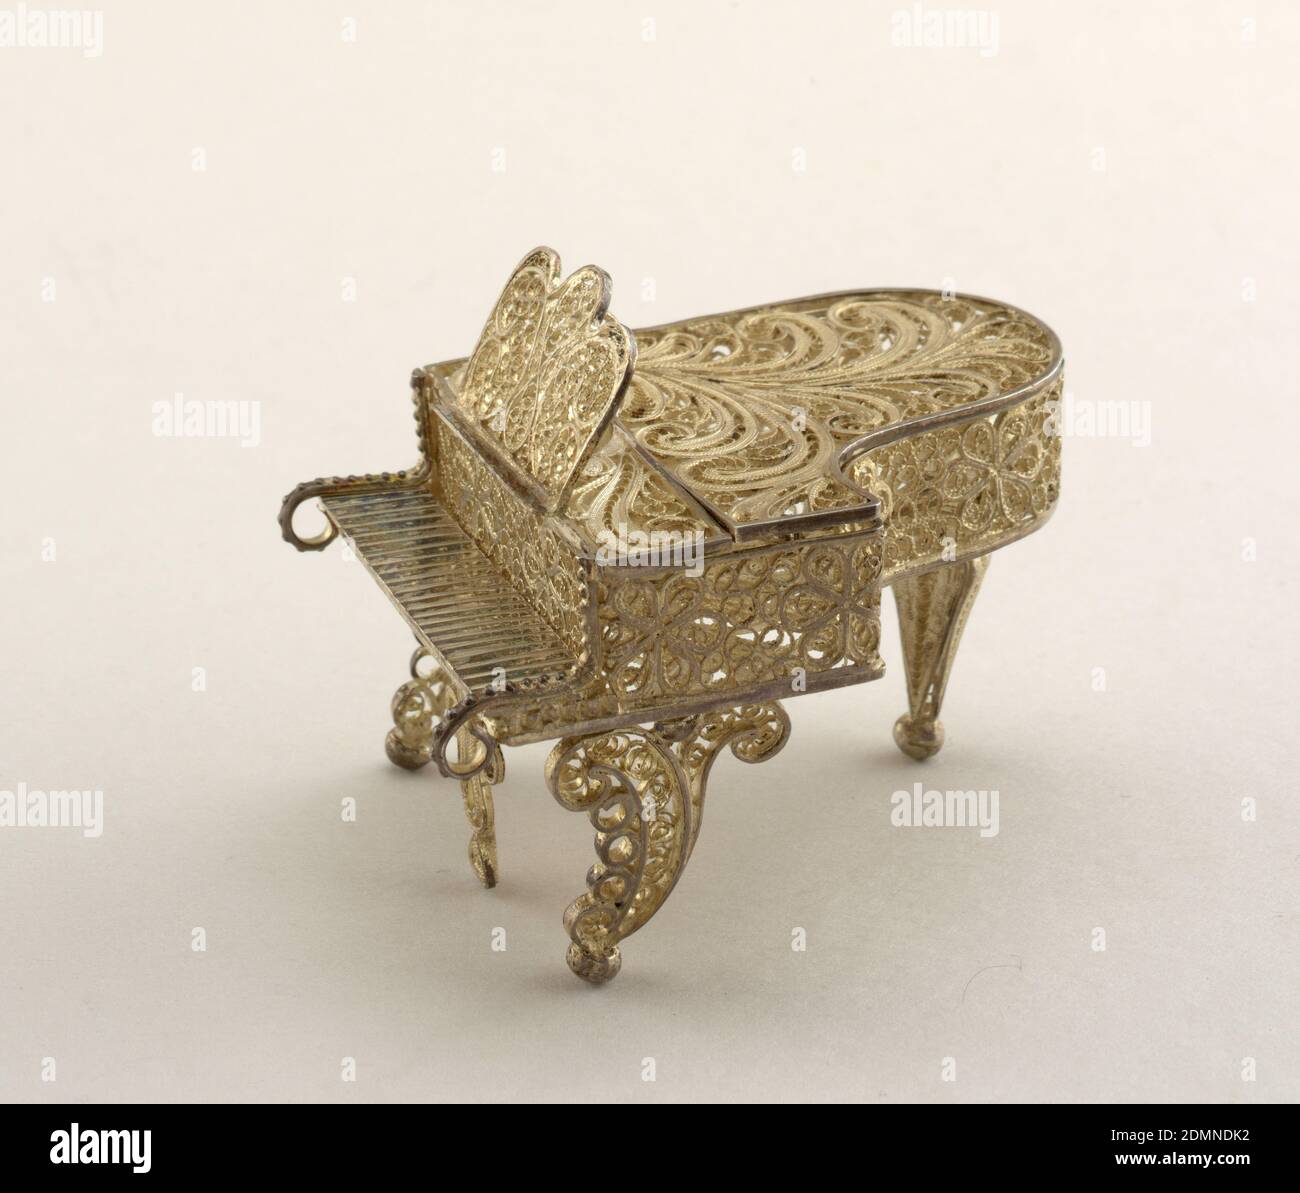 piano, Silver filigree, Grand piano. Lid can be raised. Scrolled front legs, baluster rear leg. All-over decoration on case and rack of scrolled and rosetted filigree., Italy, late 19th century, miniatures, Decorative Arts, Miniature of a piano, Miniature of a piano Stock Photo